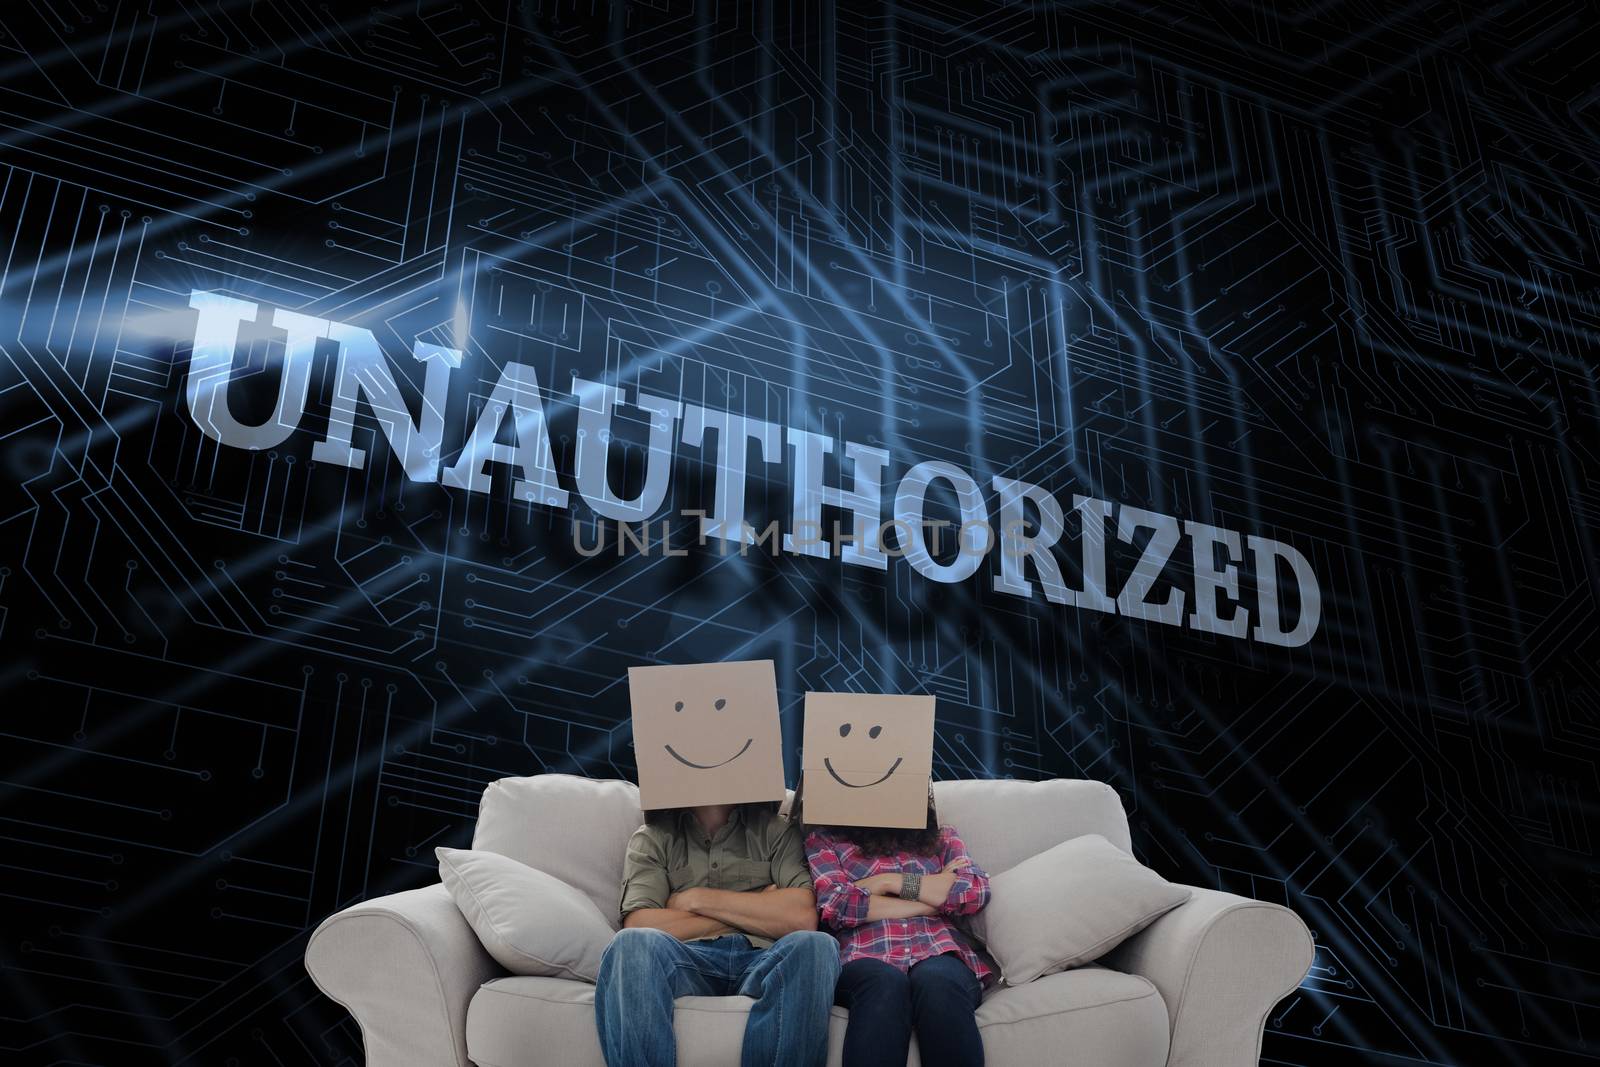 The word unauthorized and silly employees with arms folded wearing boxes on their heads against futuristic black and blue background